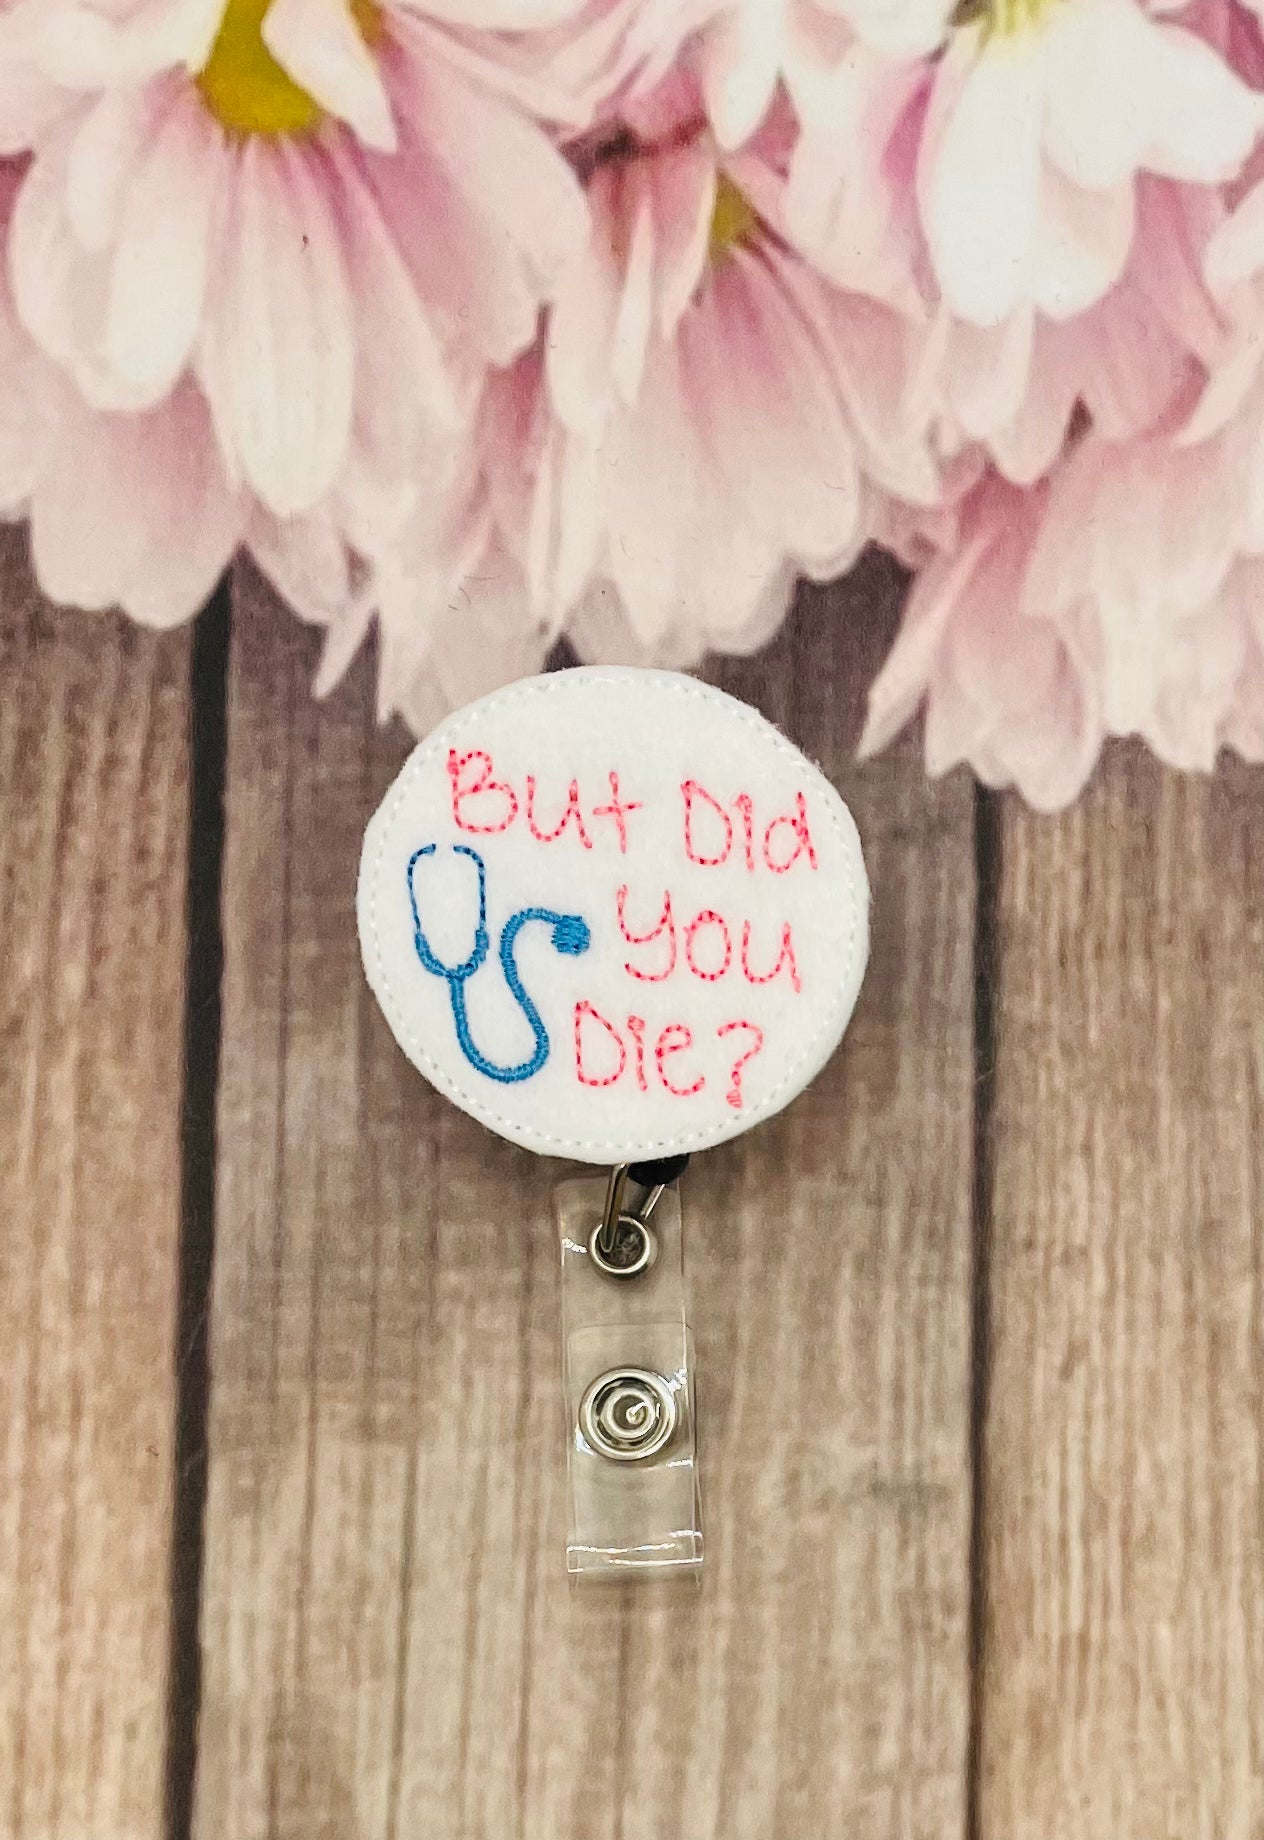 Funny snarky badge reels But did you die?